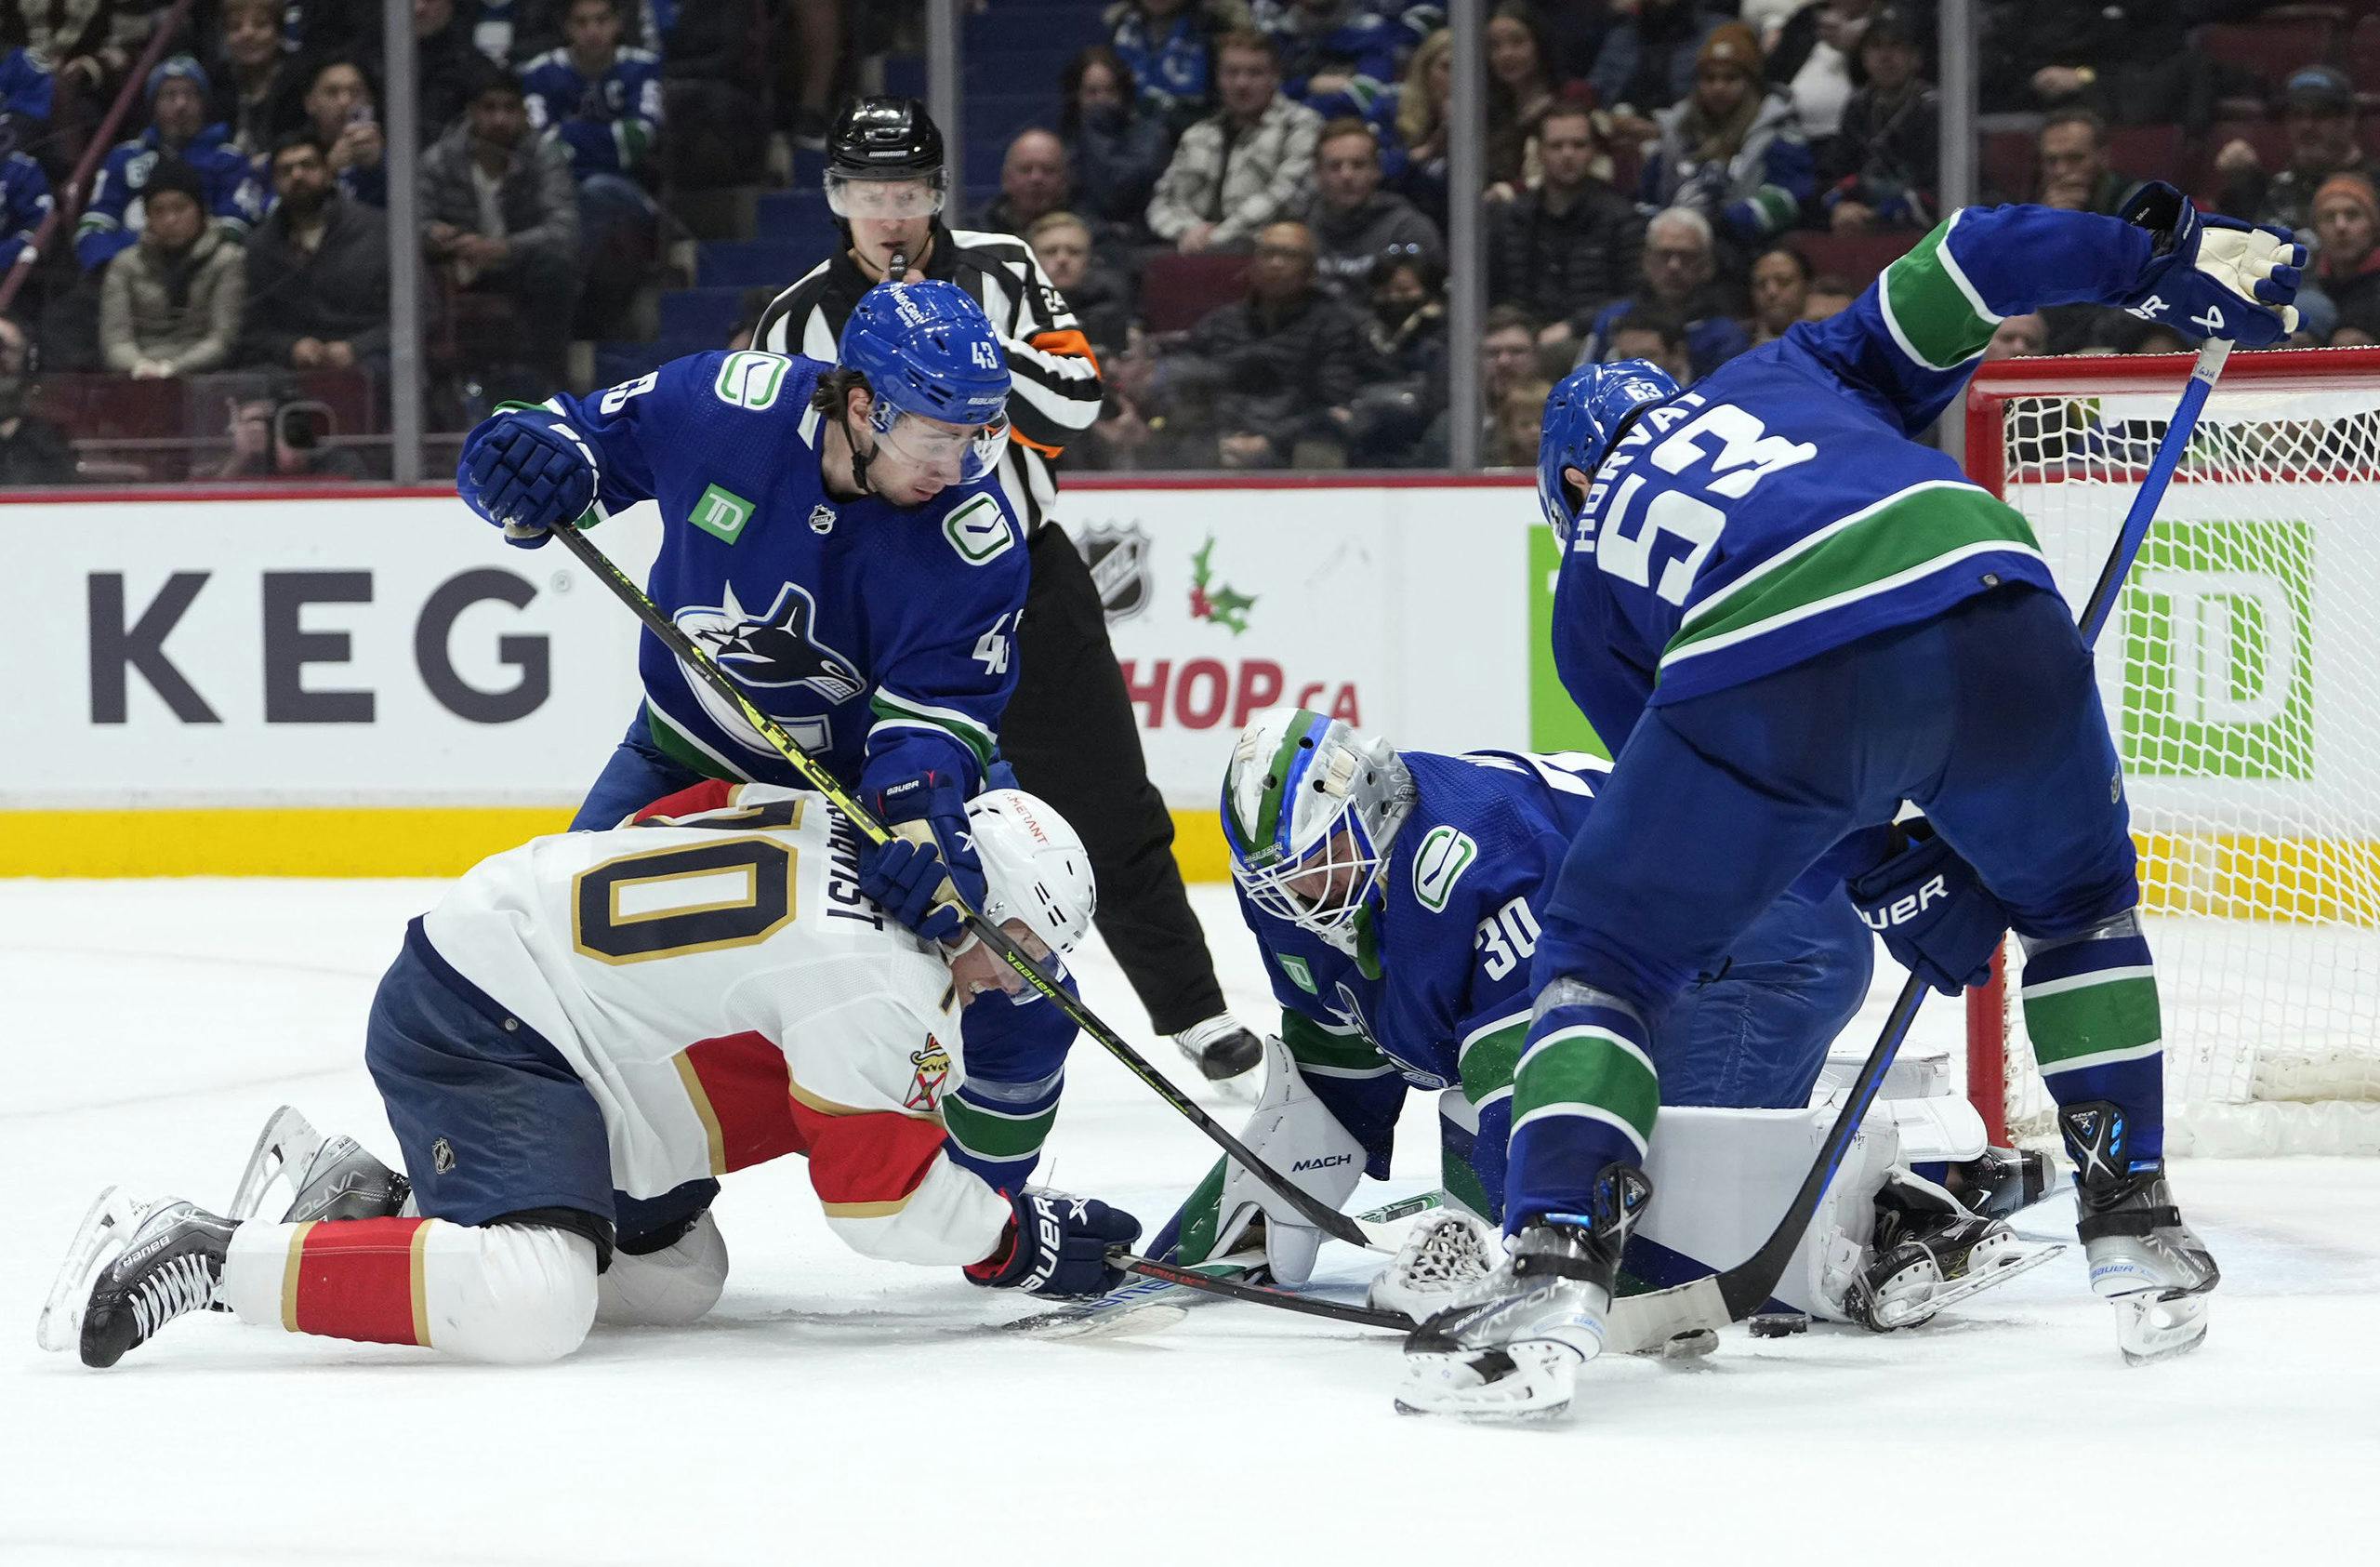 Opinion: Not retiring Roberto Luongo's jersey is an embarrassing decision  by the Canucks, and they need to rectify it - CanucksArmy